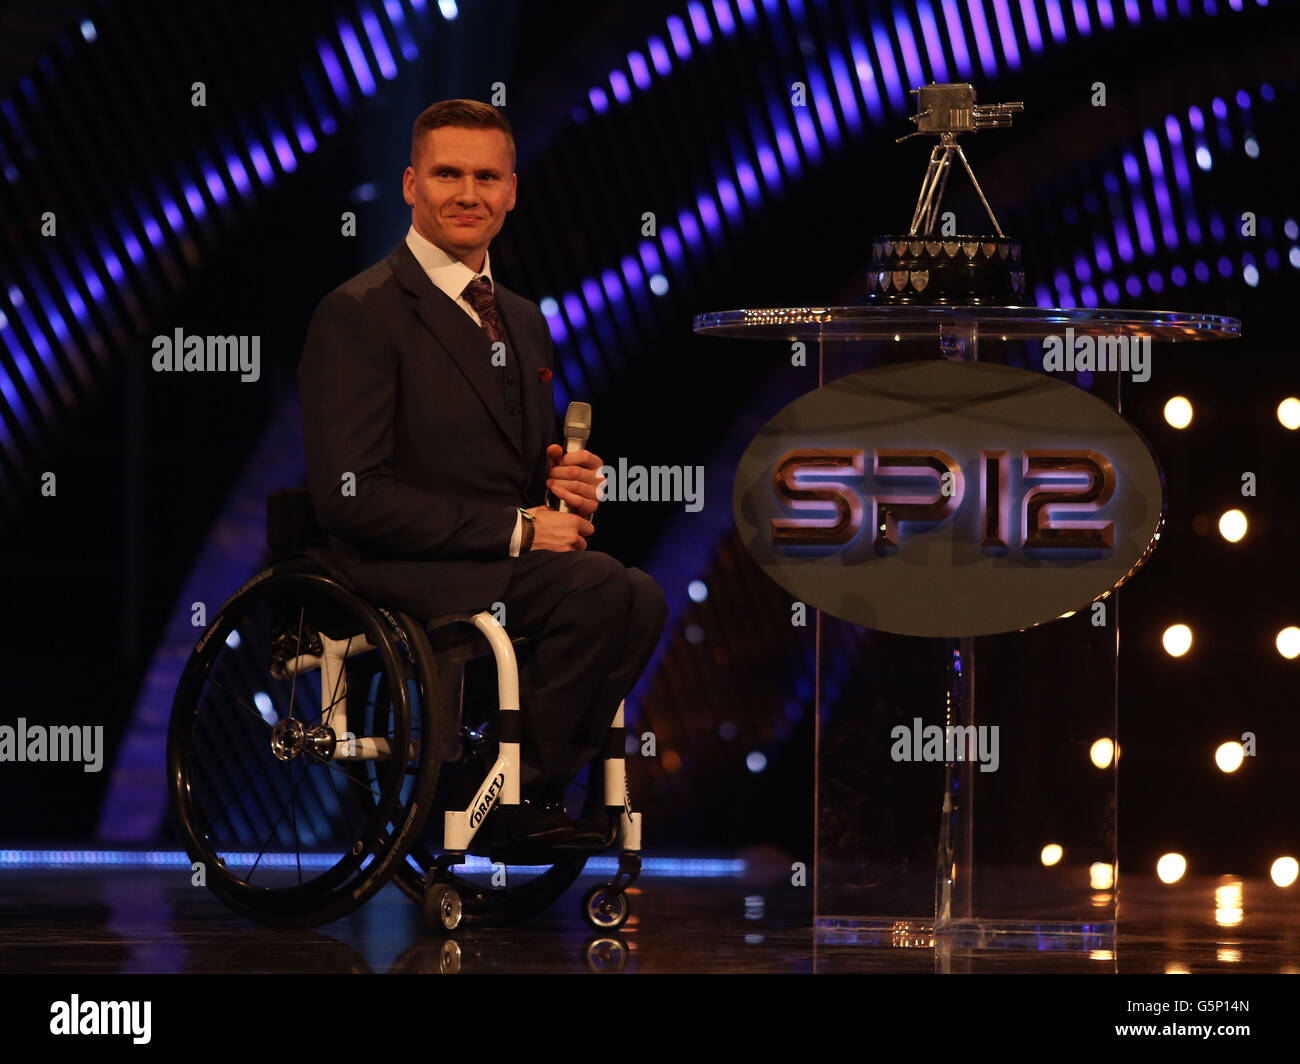 Sport - BBC Sports Personality of the Year Awards 2012 - ExCeL Arena. David Weir onstage during the BBC Sports Personality of the Year Awards 2012 at ExCeL Arena, London. Stock Photo